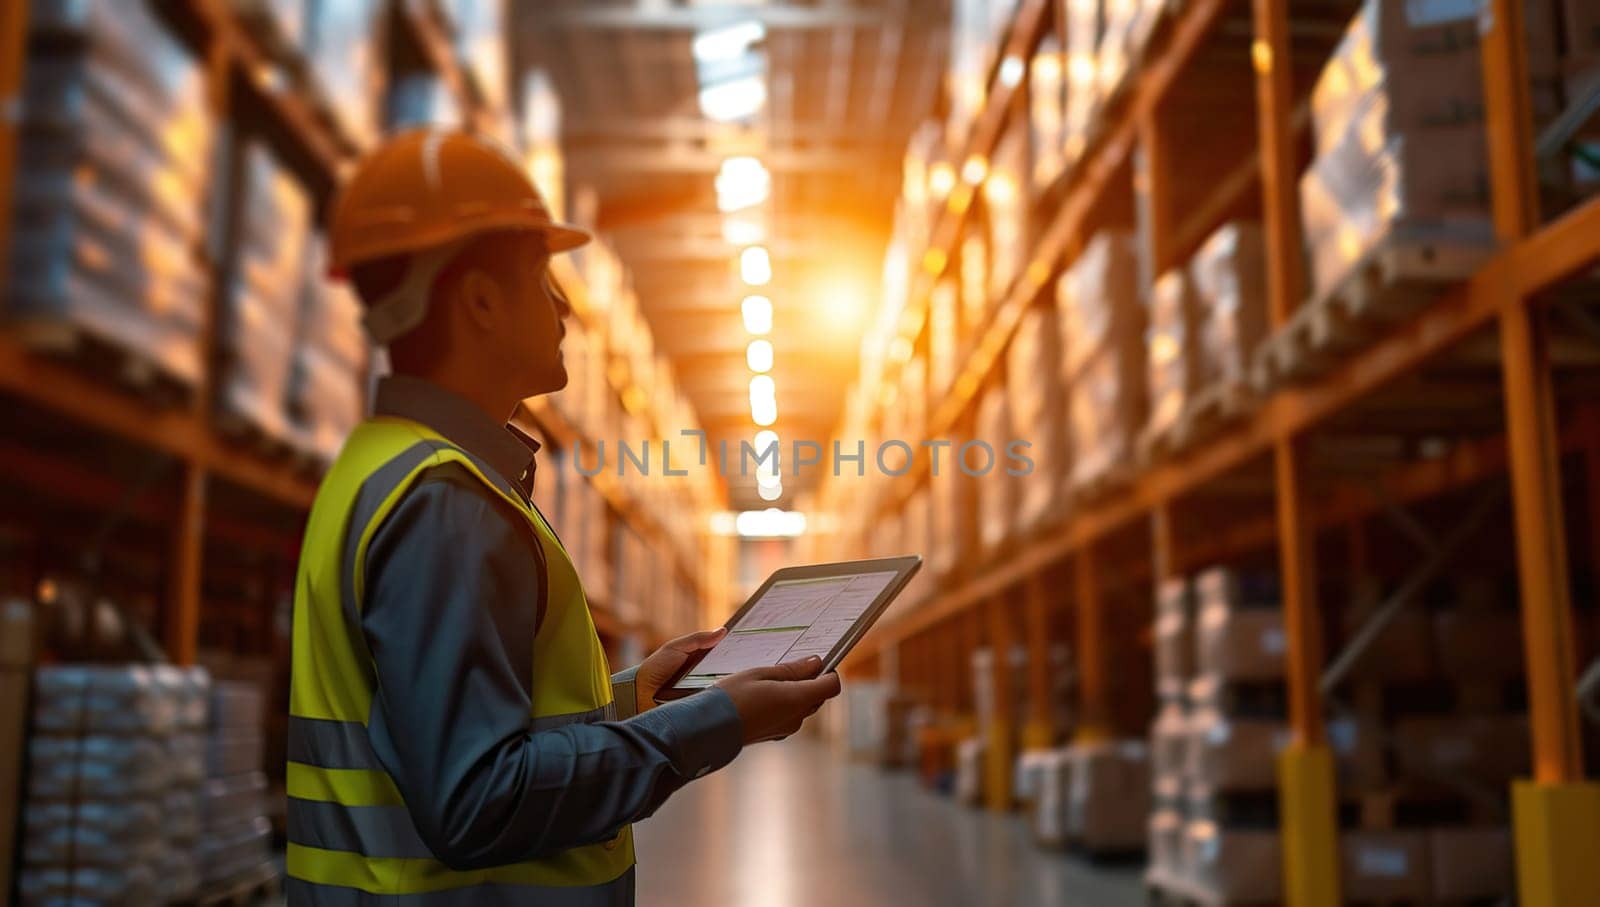 Warehouse Worker Reviews Inventory with Tablet by ailike